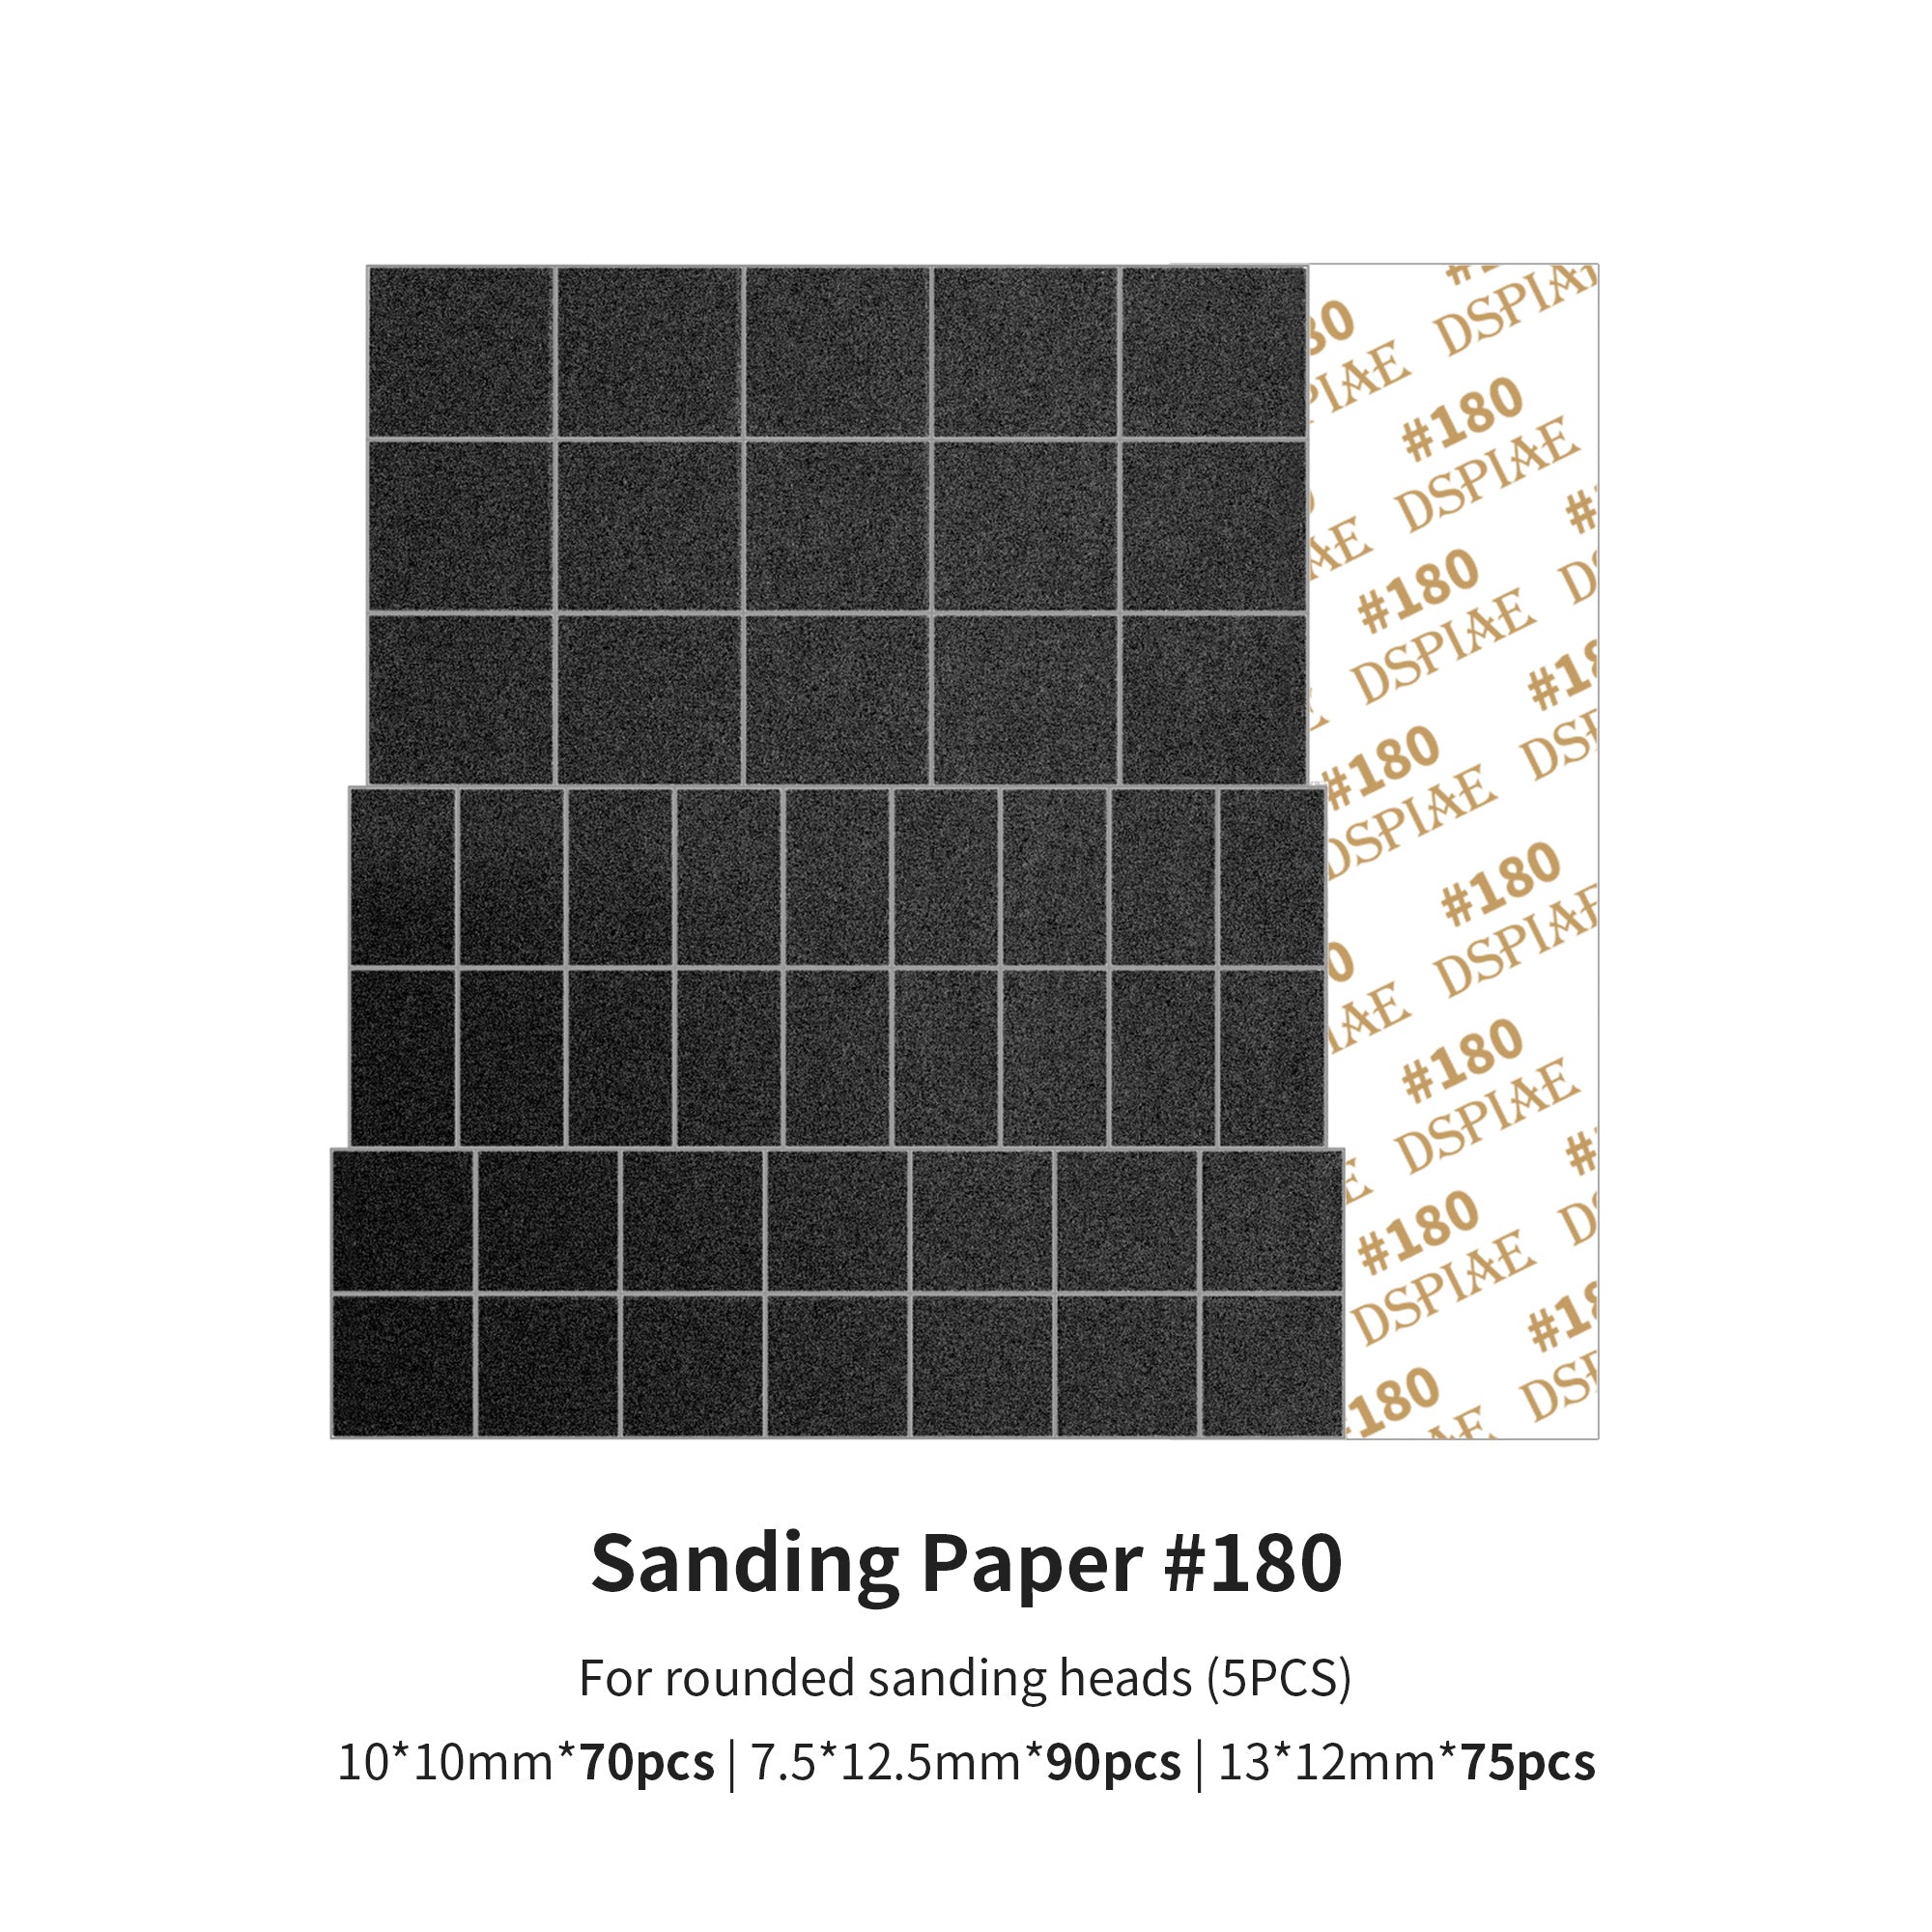 MSP Sanding paper for DSPIAE ES-A RECIPROCATING SANDER (Round head)